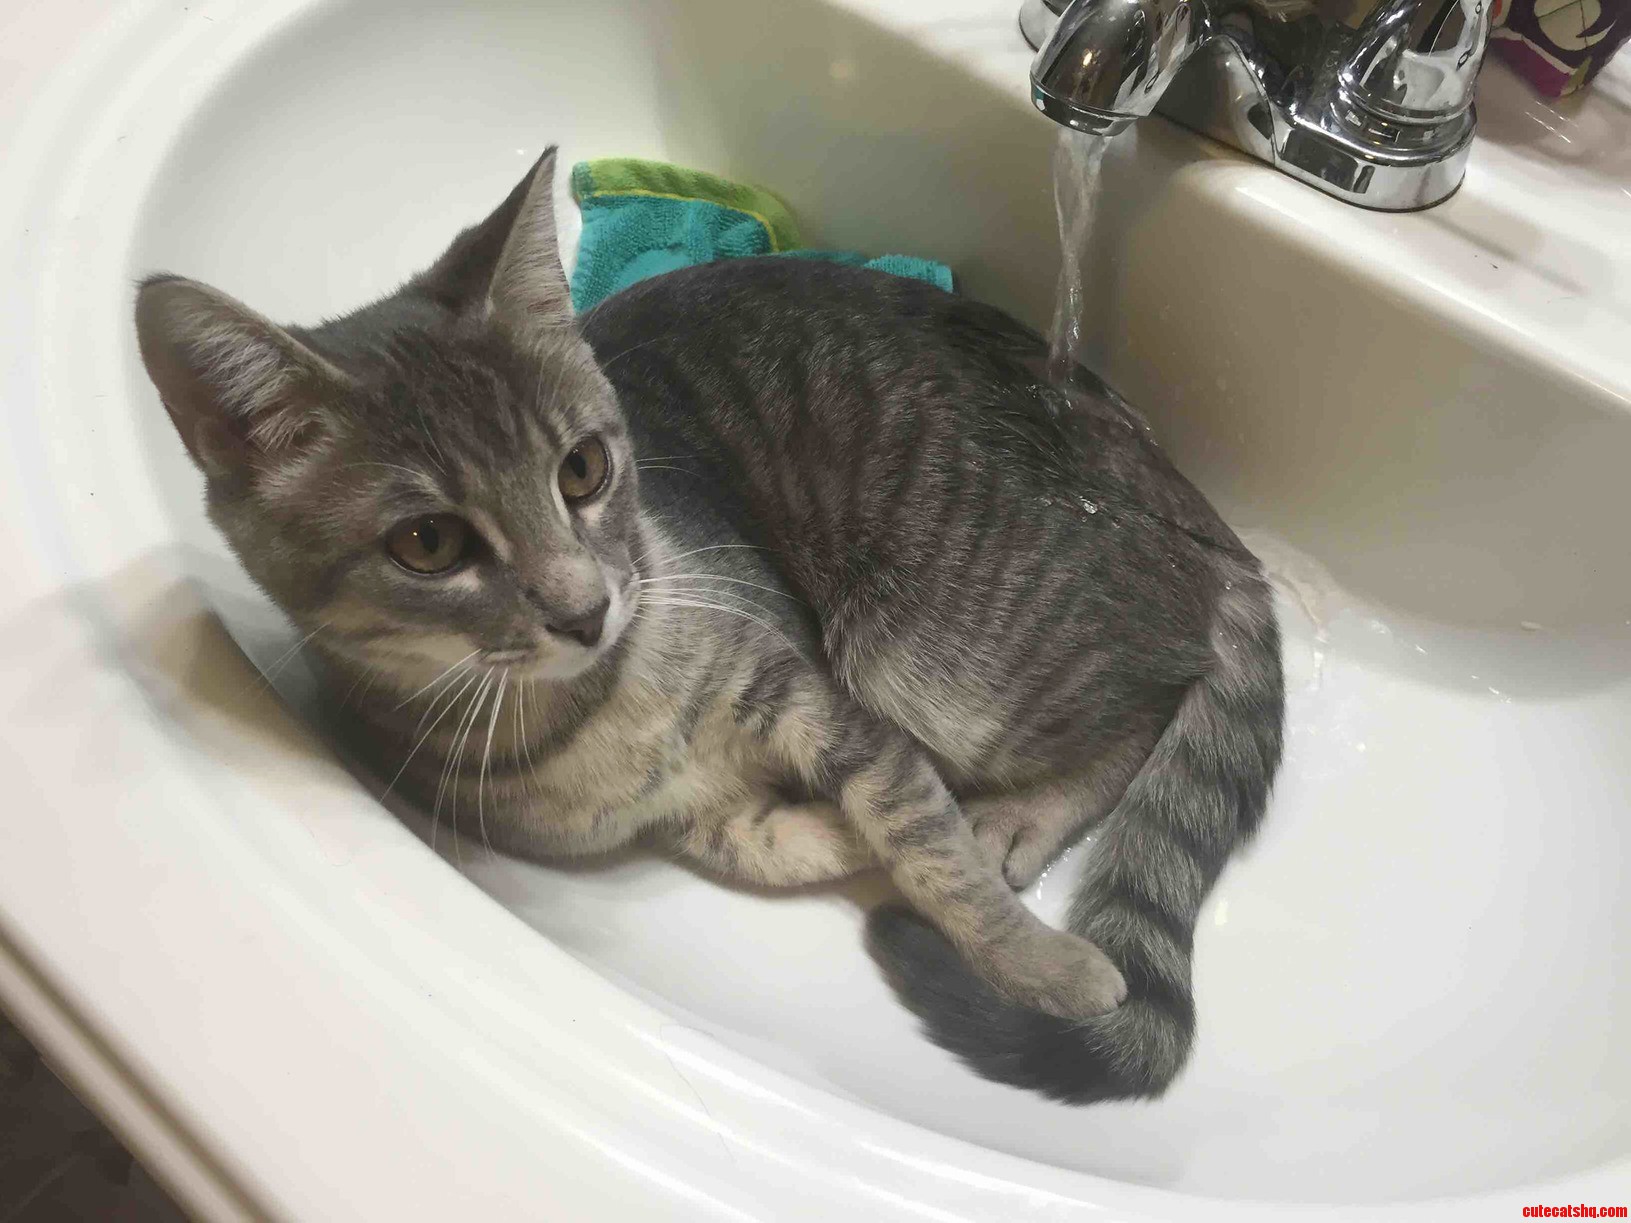 My cats favorite place to sleep she wont even move when you turn on the water